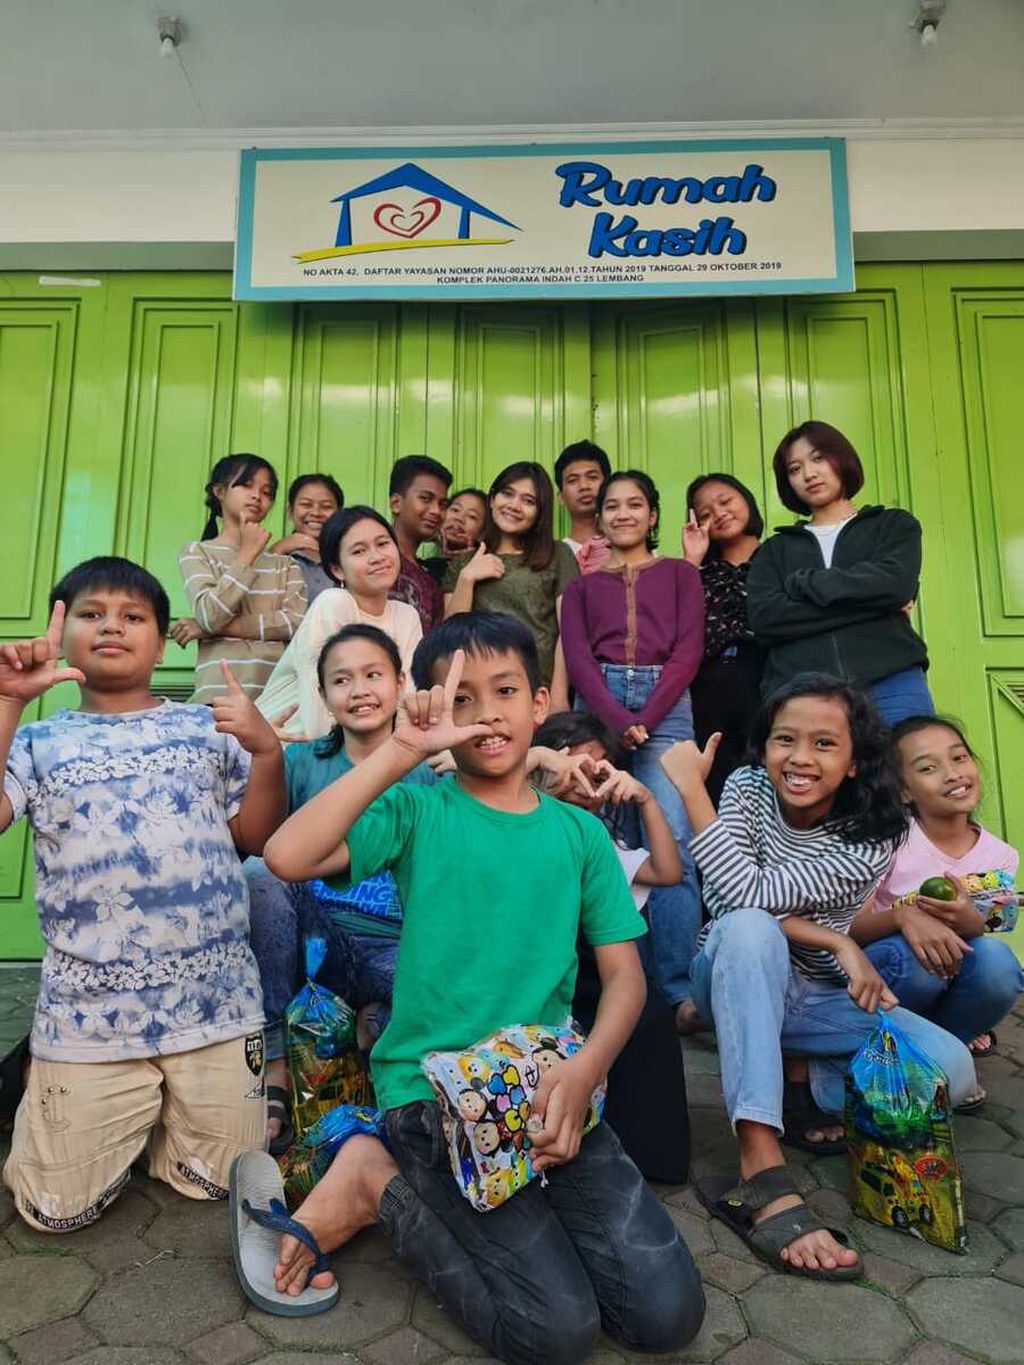 Merry Elizabeth (21)  foster child of Rumah Kasih Orphanage, Lembang, West Java (far right back, black jacket) taking a photo with the orphanage children. Even though all her life she lived in an orphanage, it did not dampen Elizabeth's determination to go to school. This year he graduated from college and has been accepted to work in Singapore.